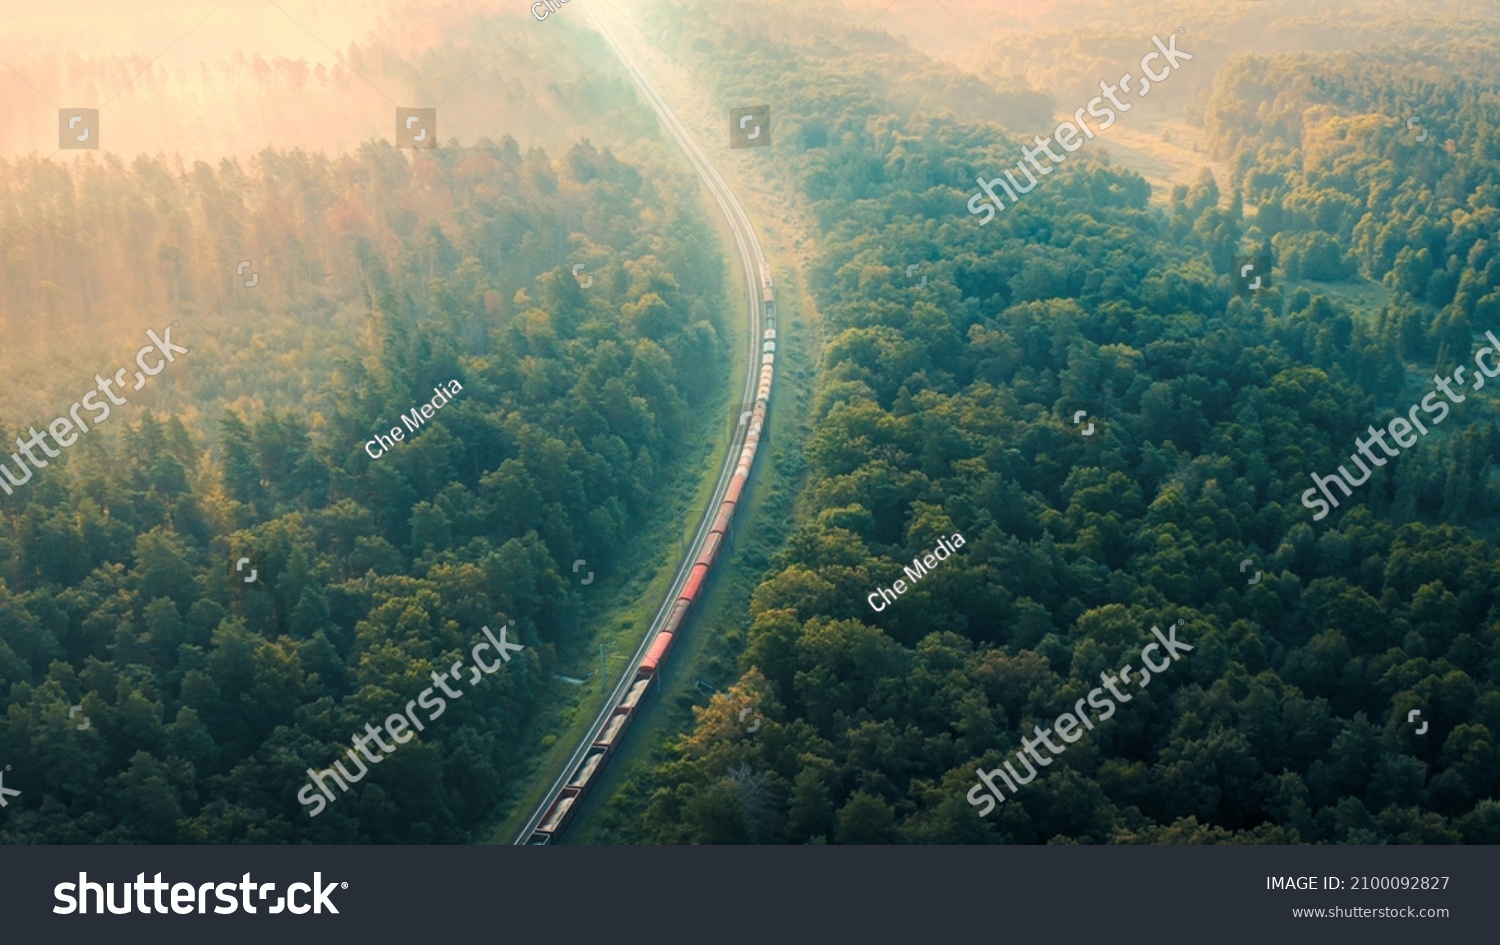 Cargo Train in summer morning forest at fog sunrise. Aerial view of moving freight train in forest. Morning mist landscape with train, railroad, foggy trees. Top aerial drone view near railway. #2100092827